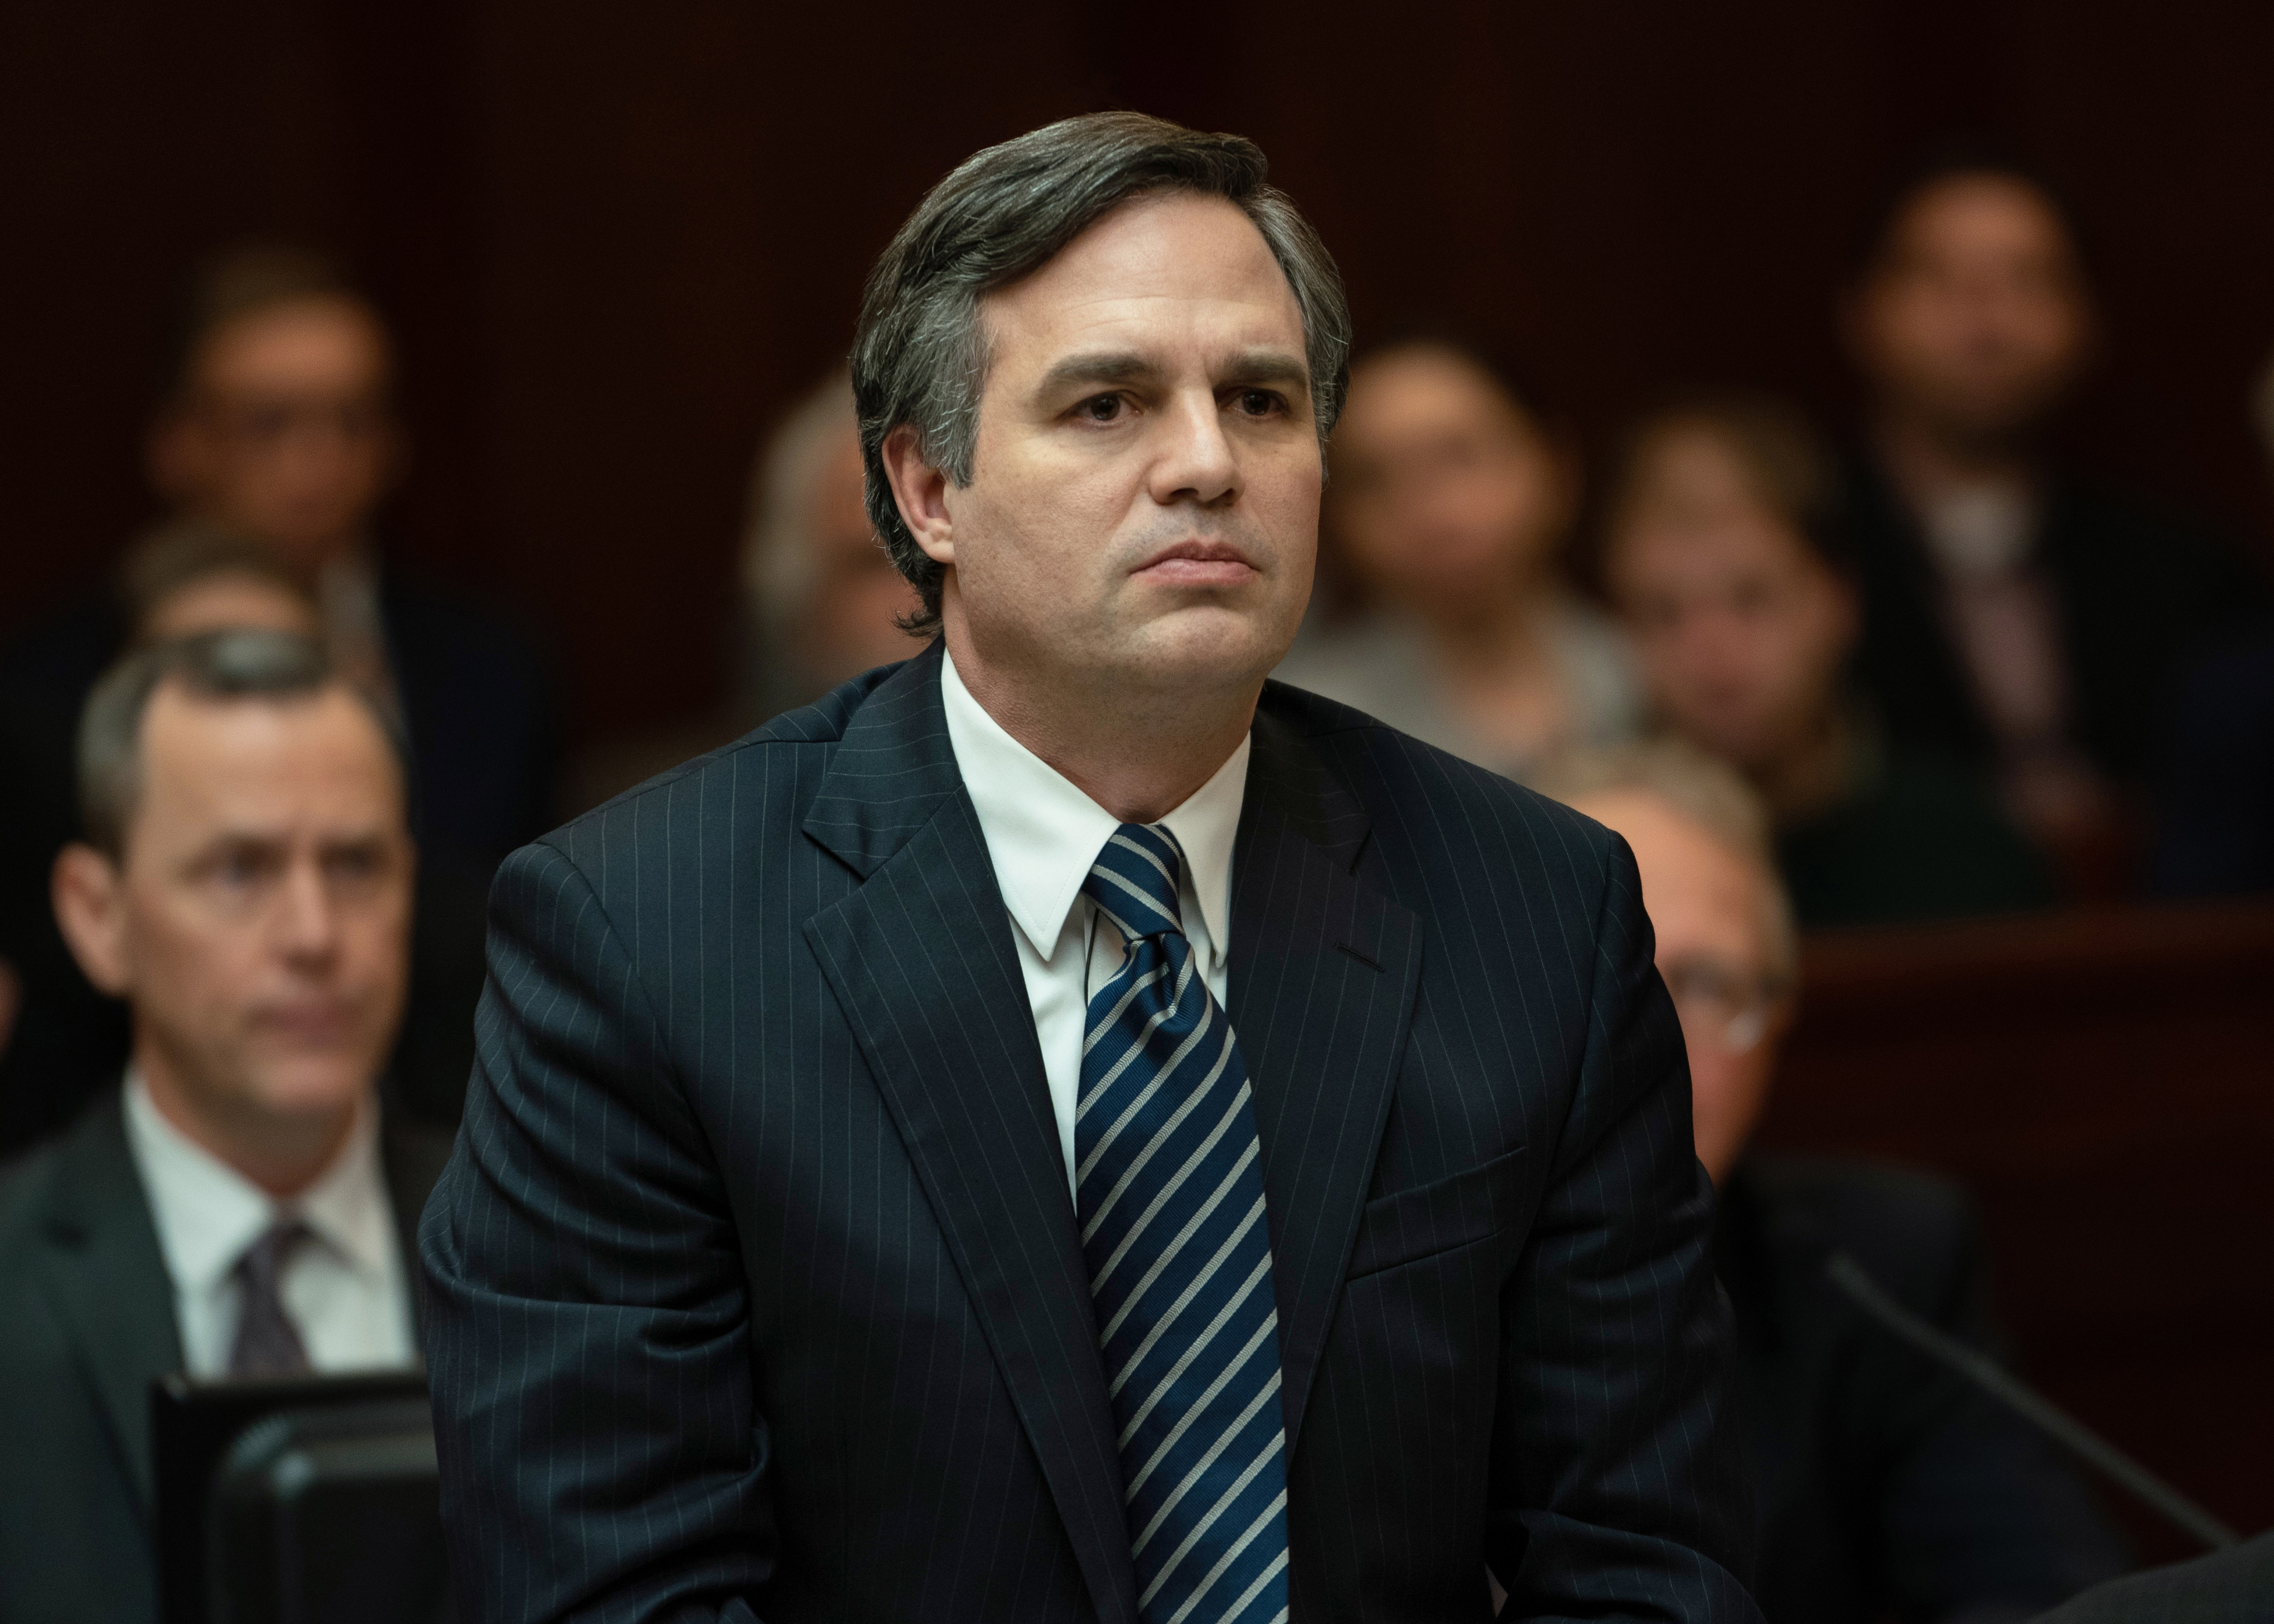 A medium close-up shot of a man wearing a dark blue suit with a striped necktie sitting at the witness stand of a courtroom in Dark Waters.